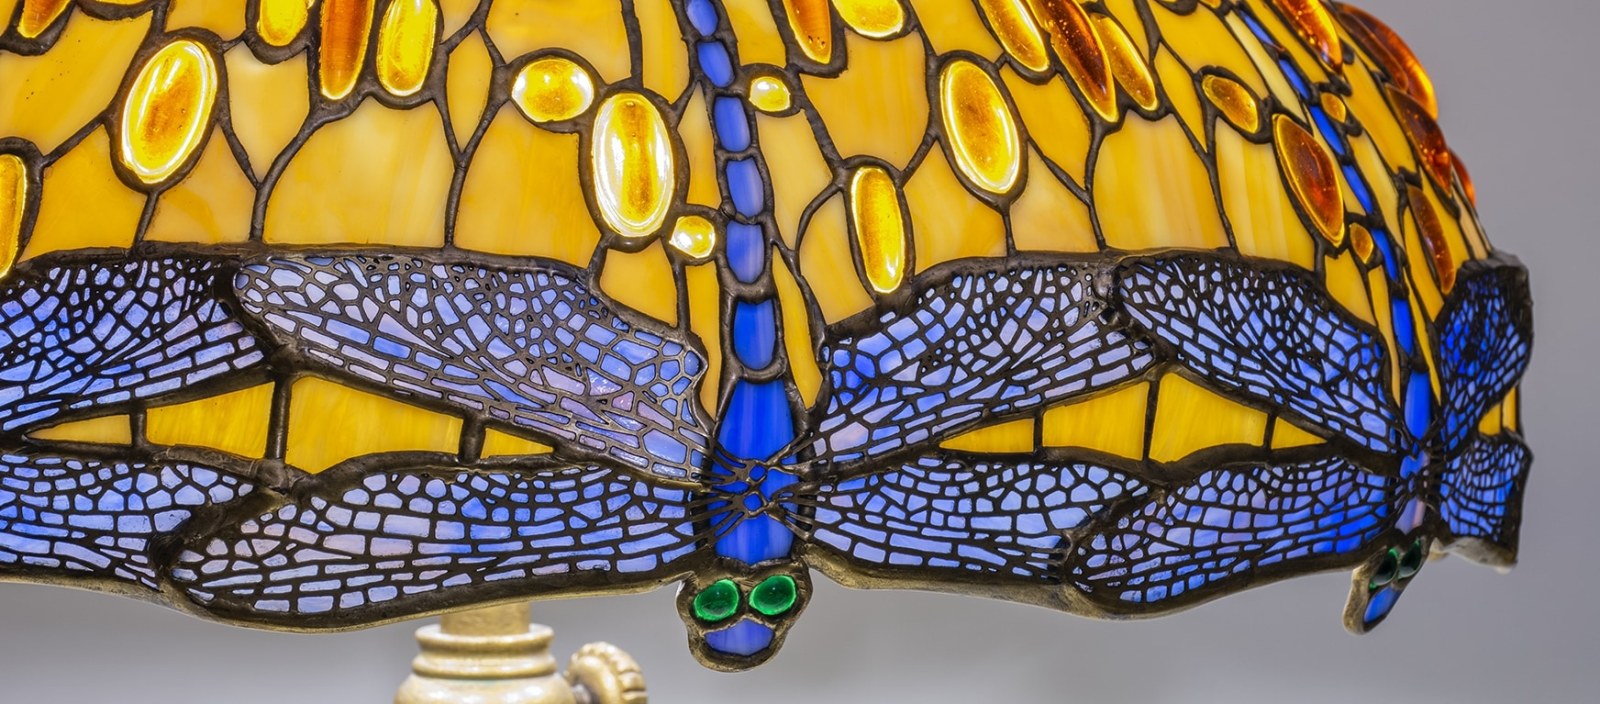 A detail shot of an original leaded glass Tiffany Lamp shade depicting blue dragonflies with rounded teal eyes, against a background of streaky golden yellow glass with rounded yellow pressed glass jewels